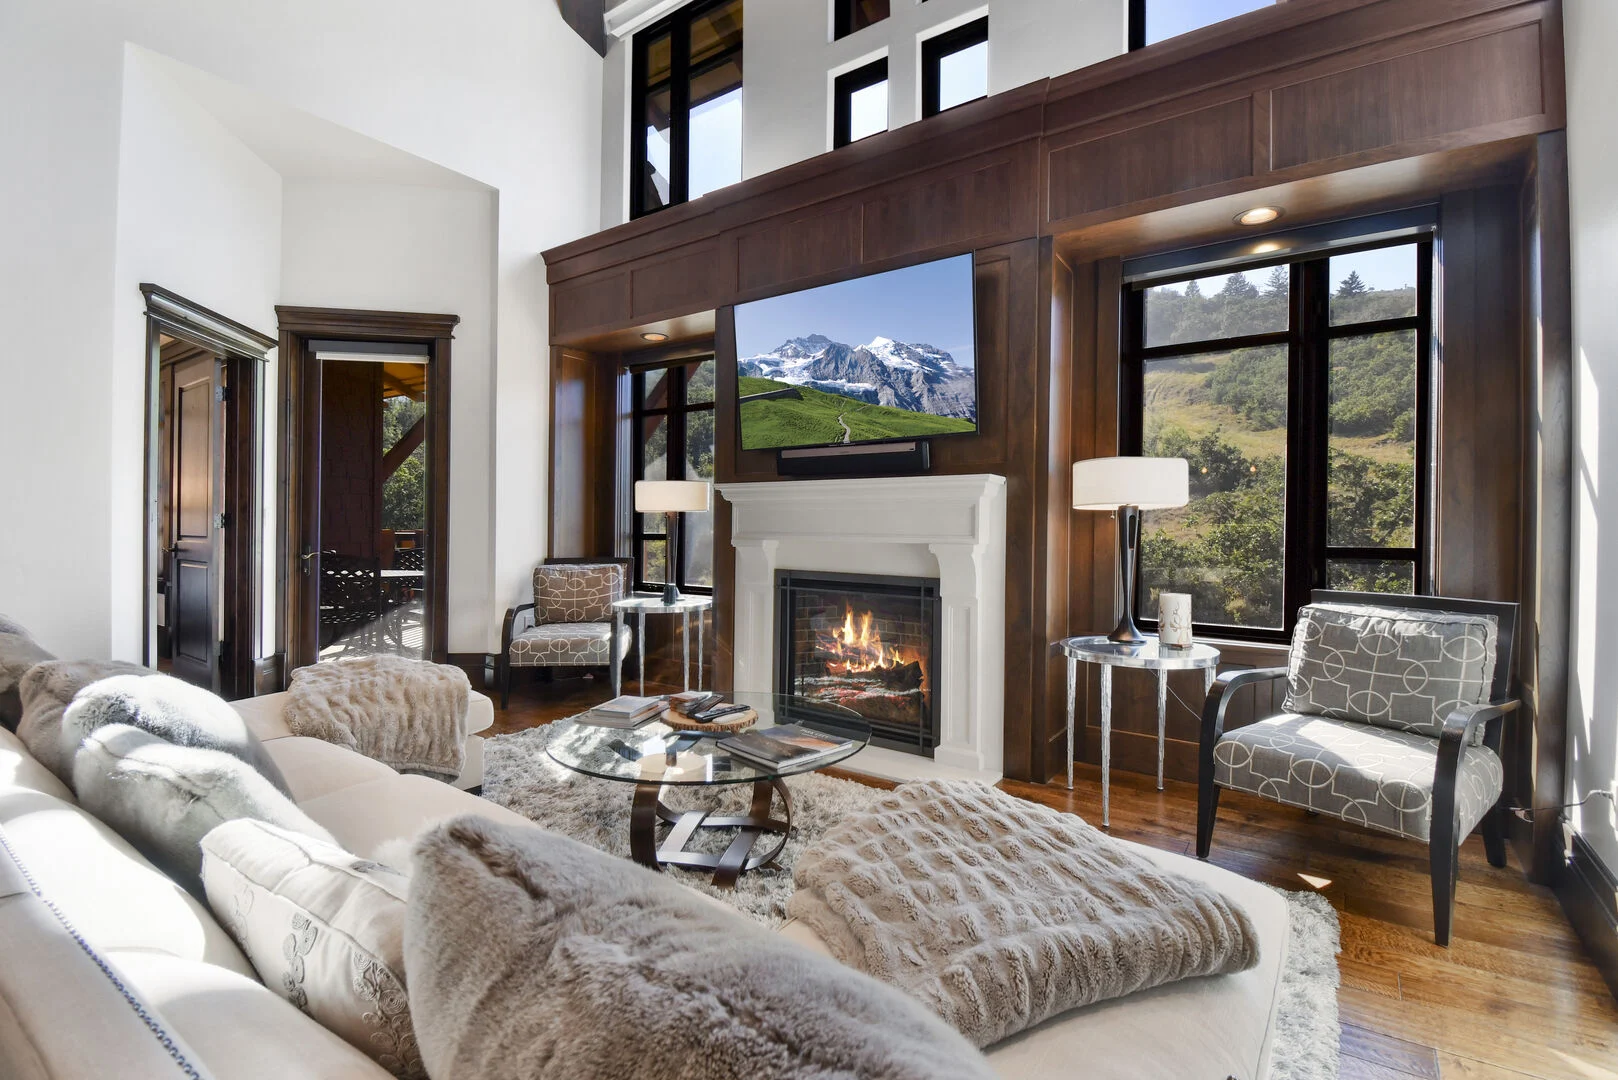 One of our romantic homes for rent in Park City, Utah with a fireplace.